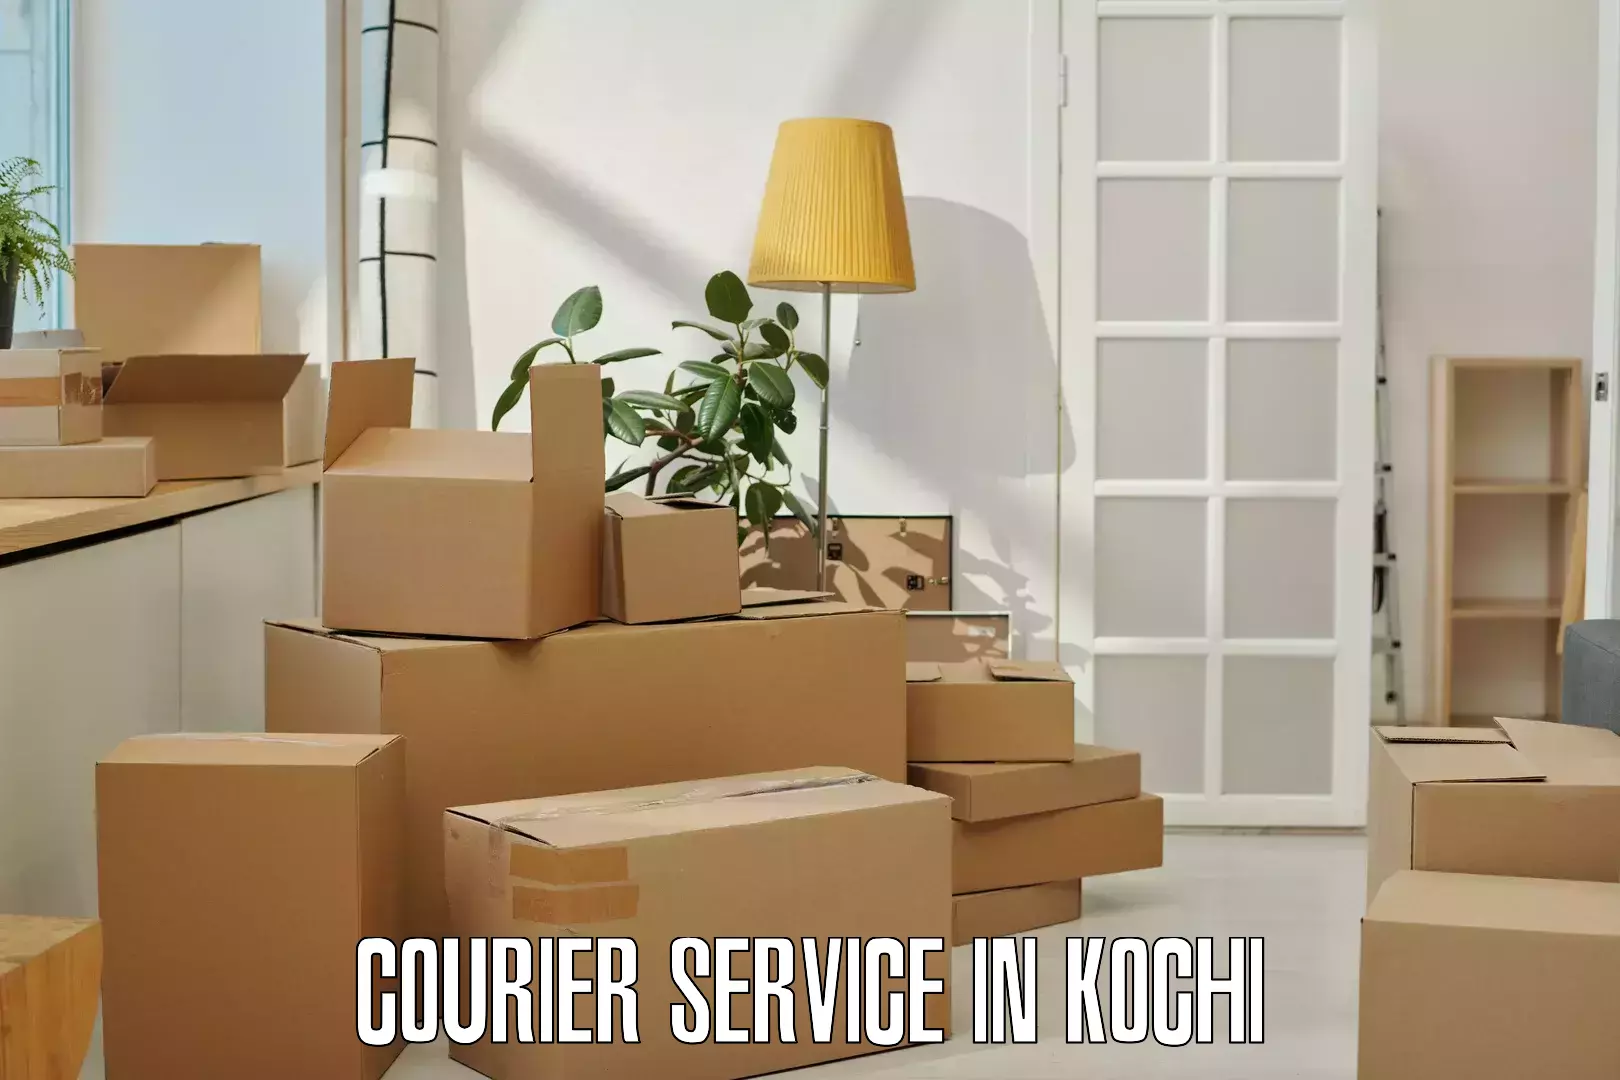 Customer-oriented courier services in Kochi